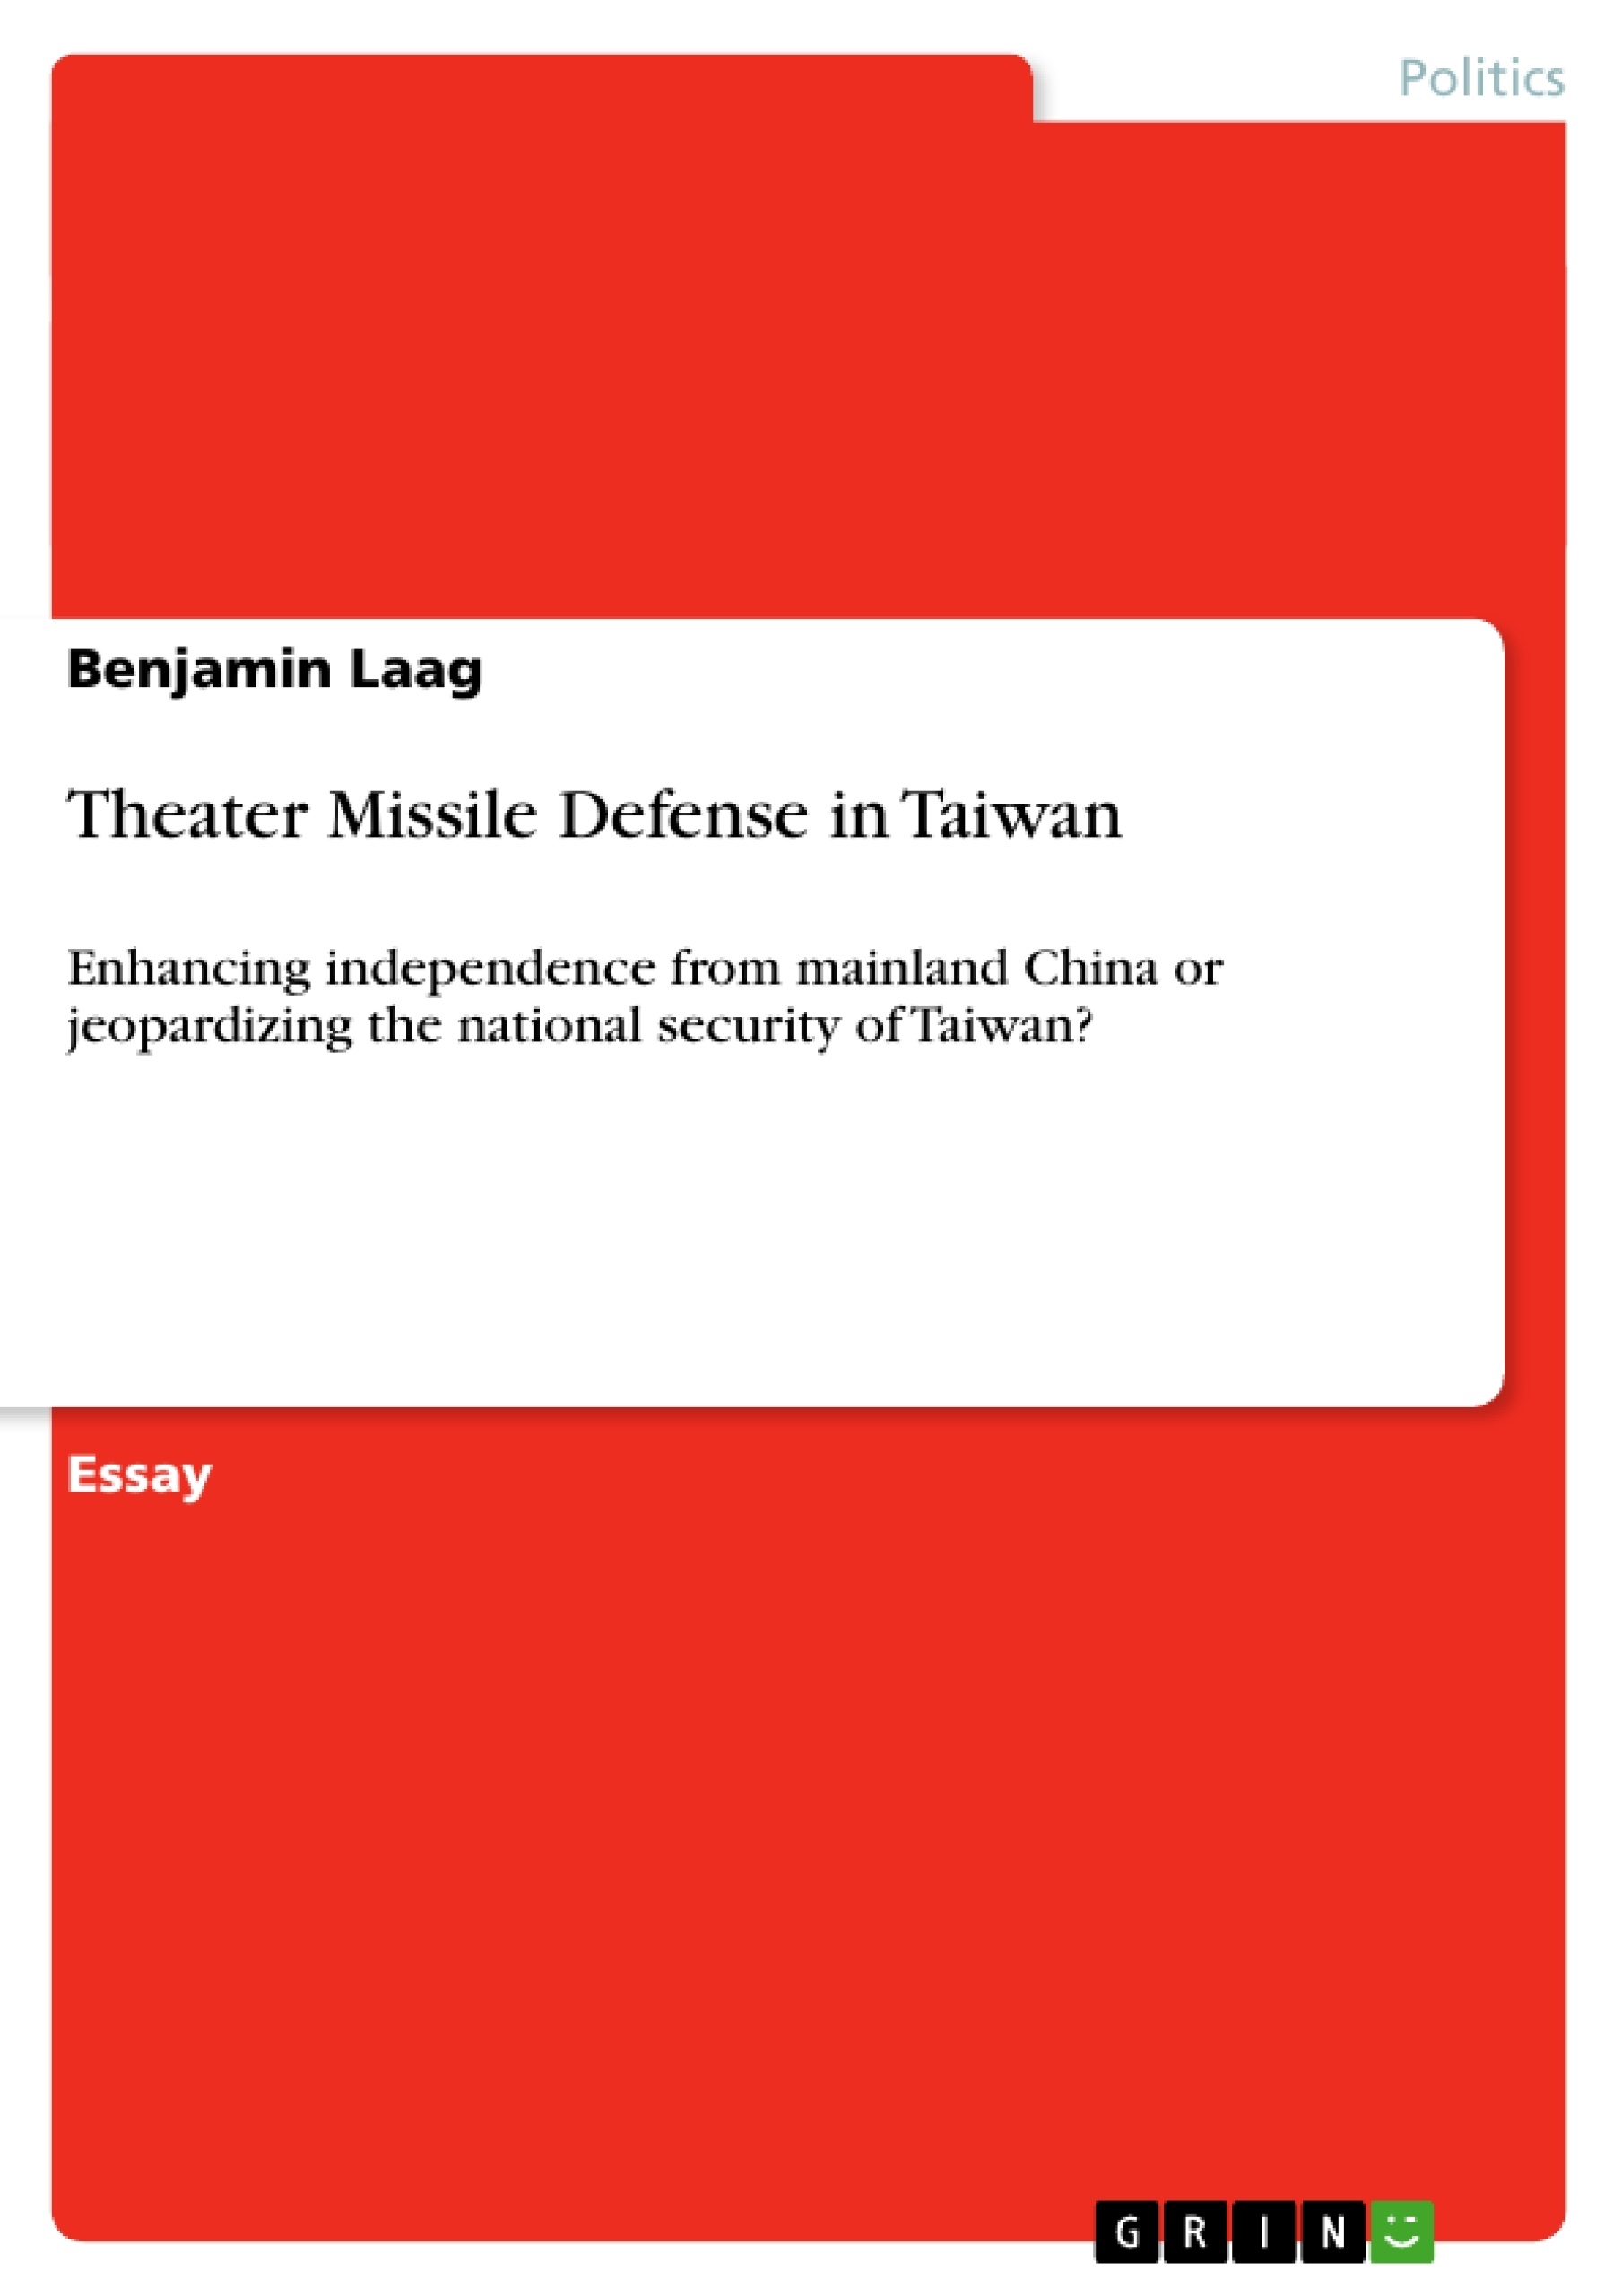 Title: Theater Missile Defense in Taiwan